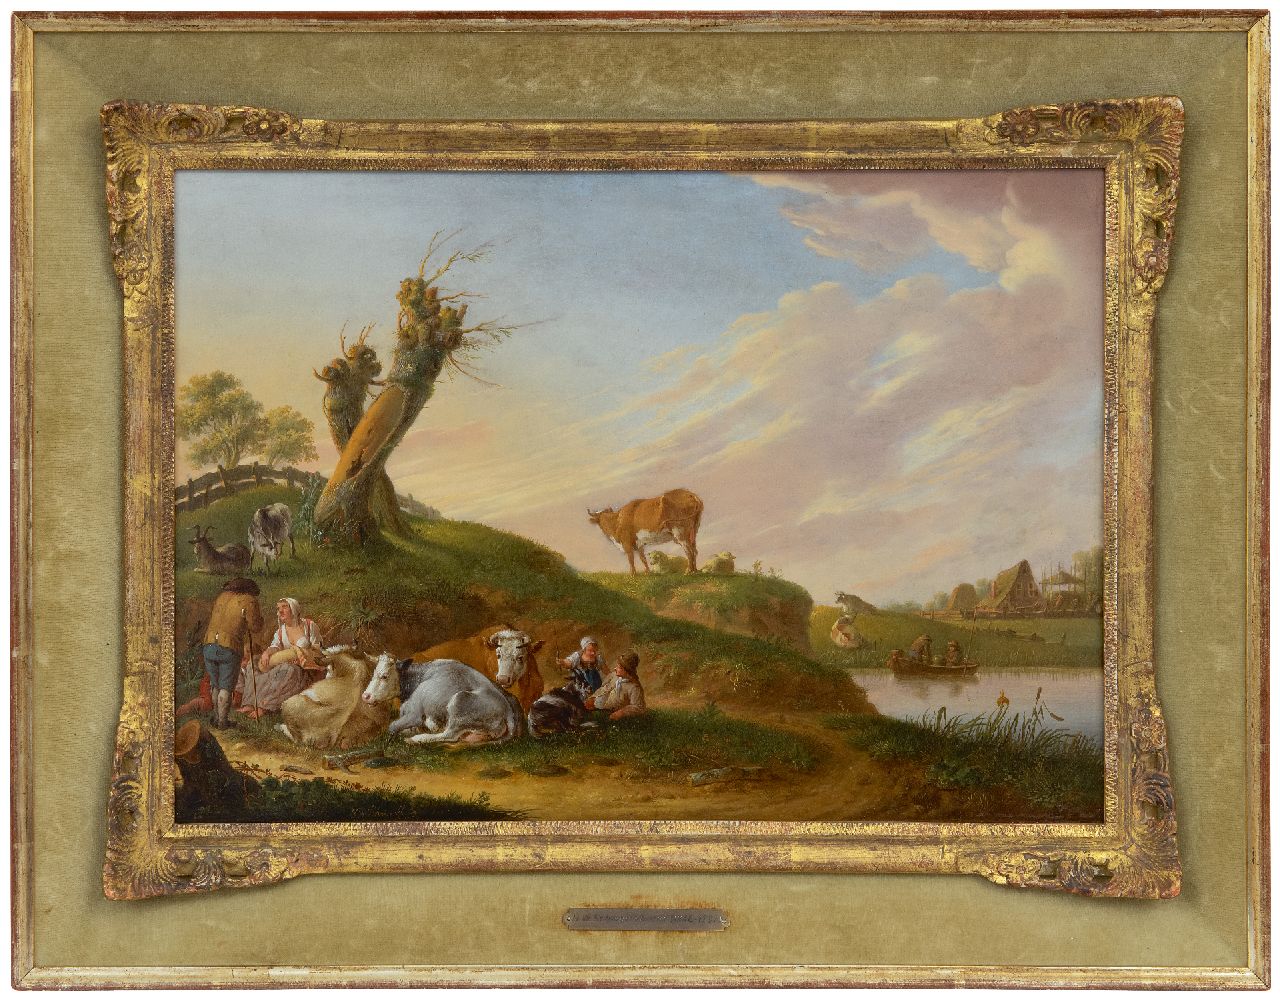 Schweickhardt H.W.  | Heinrich Wilhelm Schweickhardt | Paintings offered for sale | Shepherds with their flock near a river, oil on panel 33.5 x 47.2 cm, signed l.l. and dated 1774